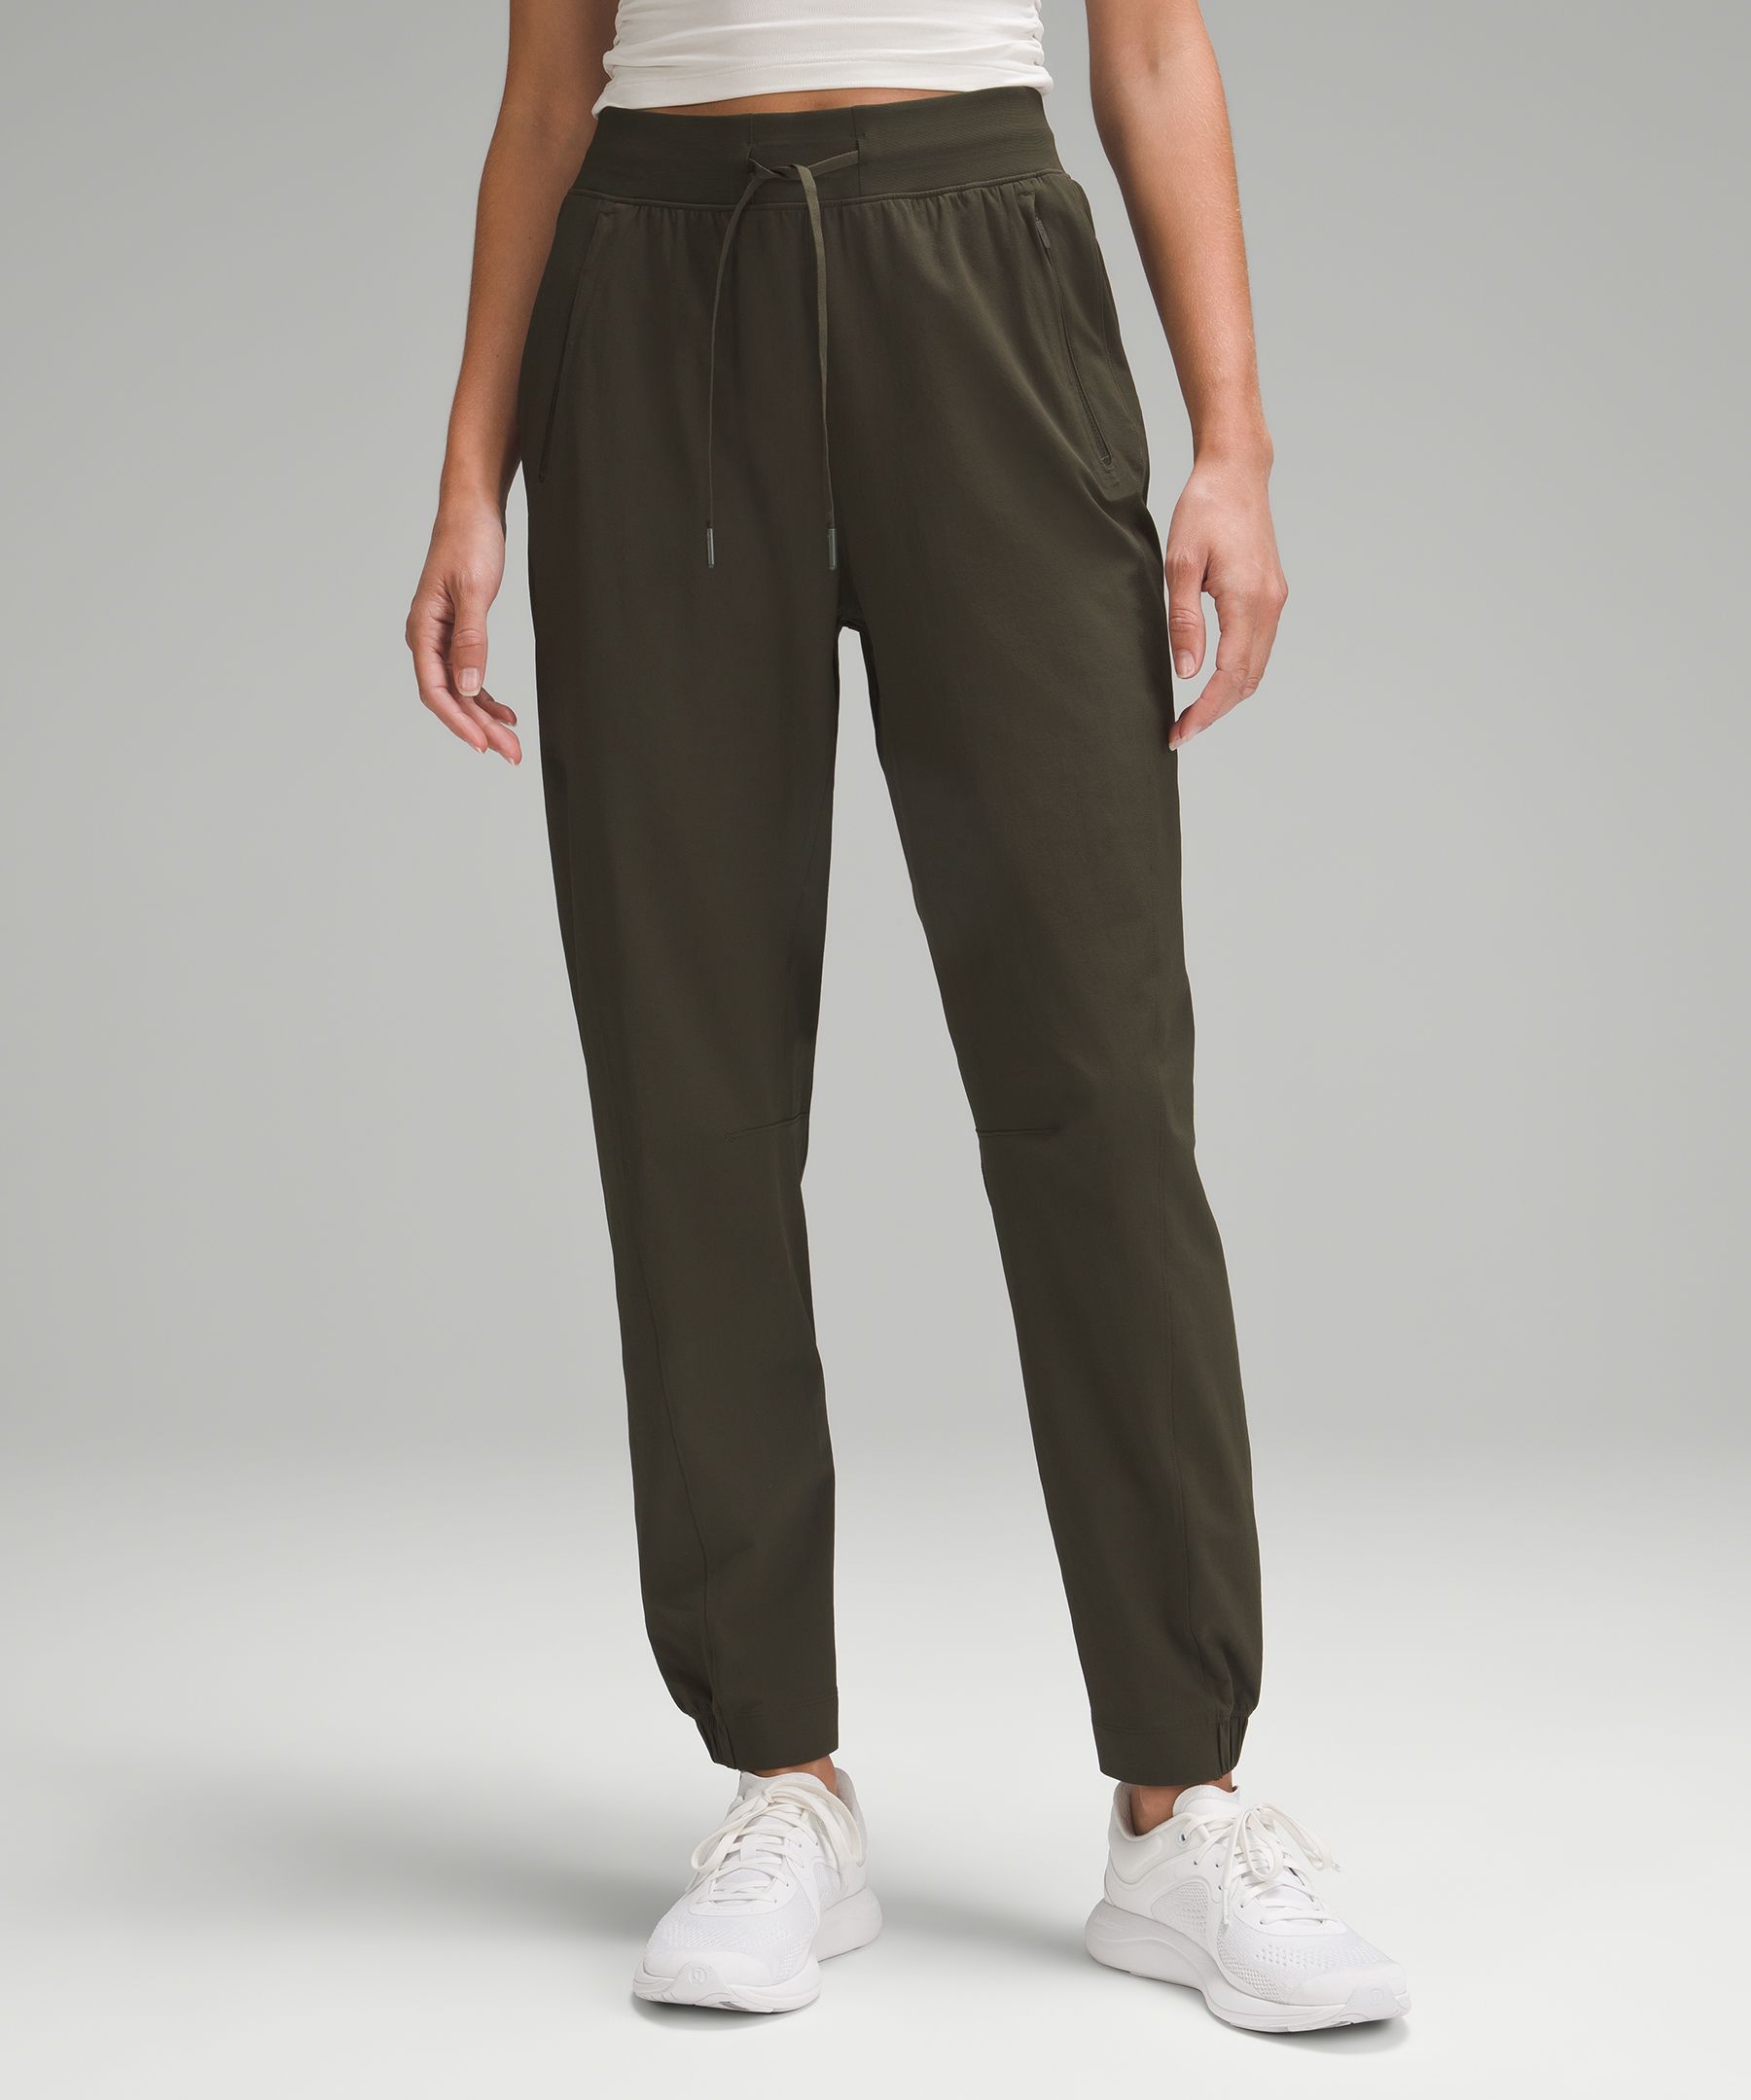 Here to There Pant #lululemon  Pants for women, Working out